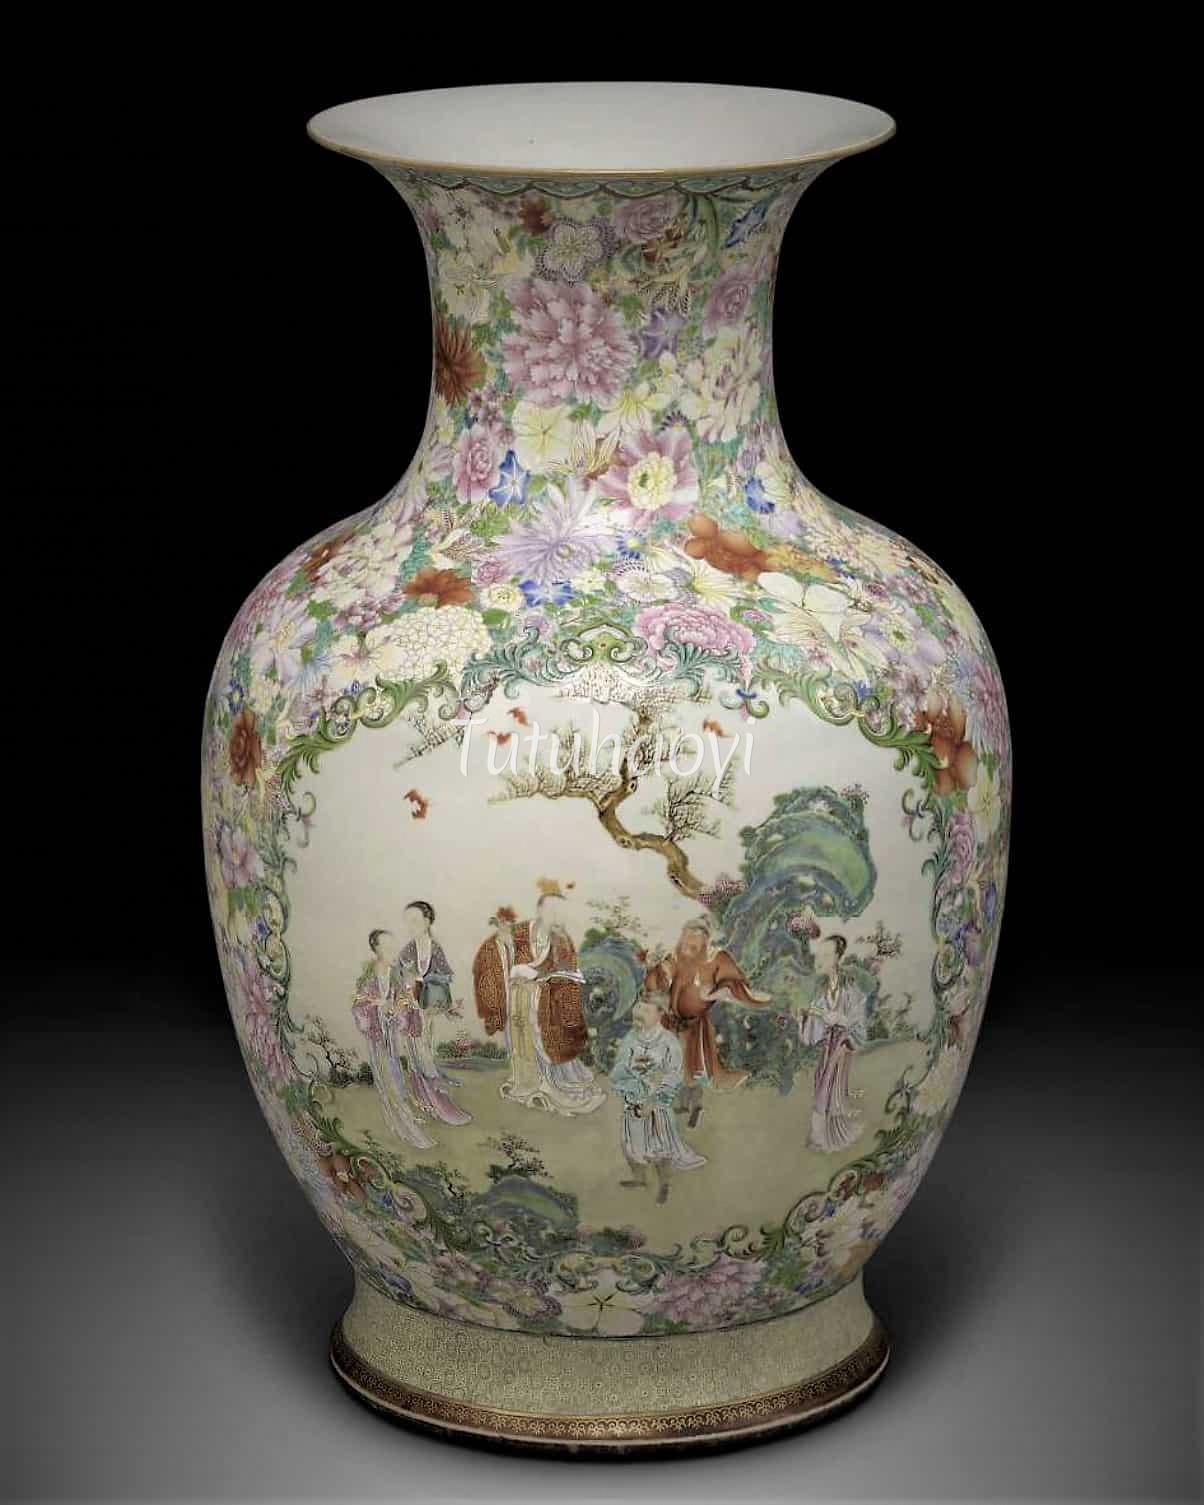 Qianlong porcelain vase bearing a pun picture of 'May good fortune descend from heaven' 